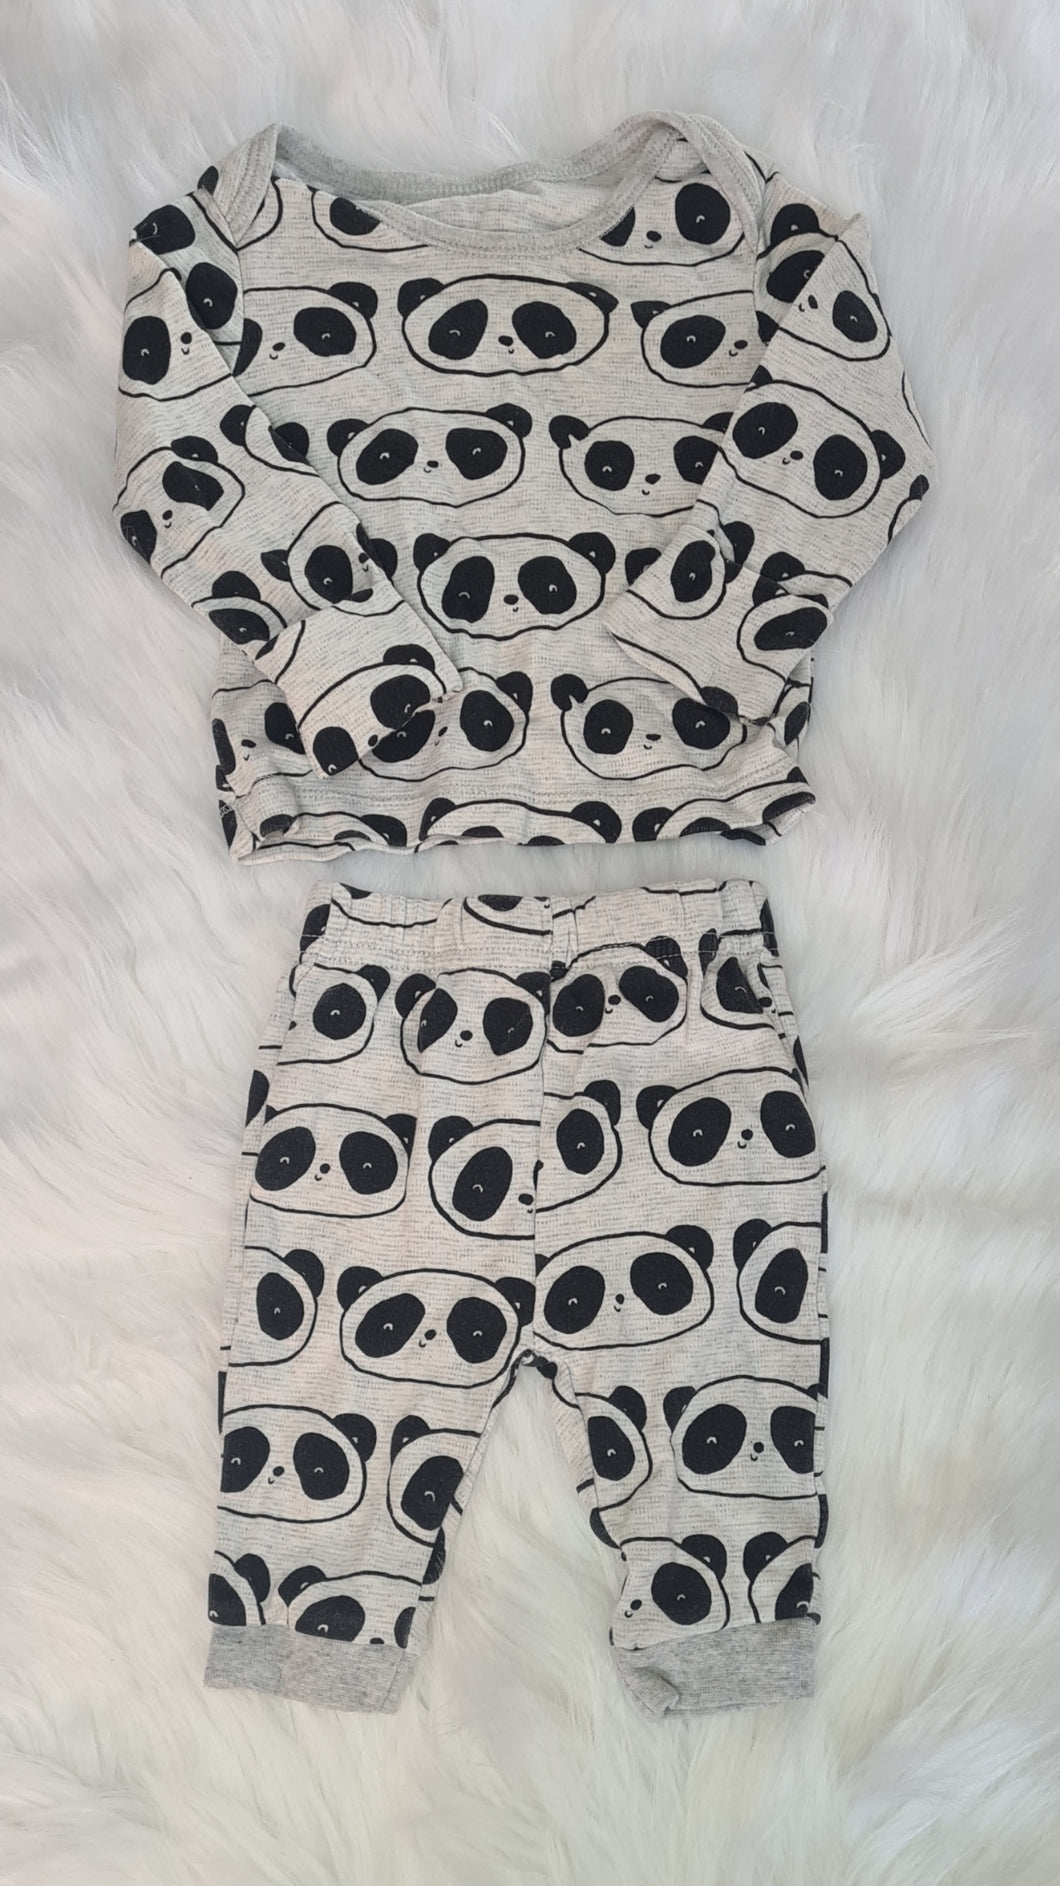 Boys 0-3 months - Panda and Grey Top and Joggers Set